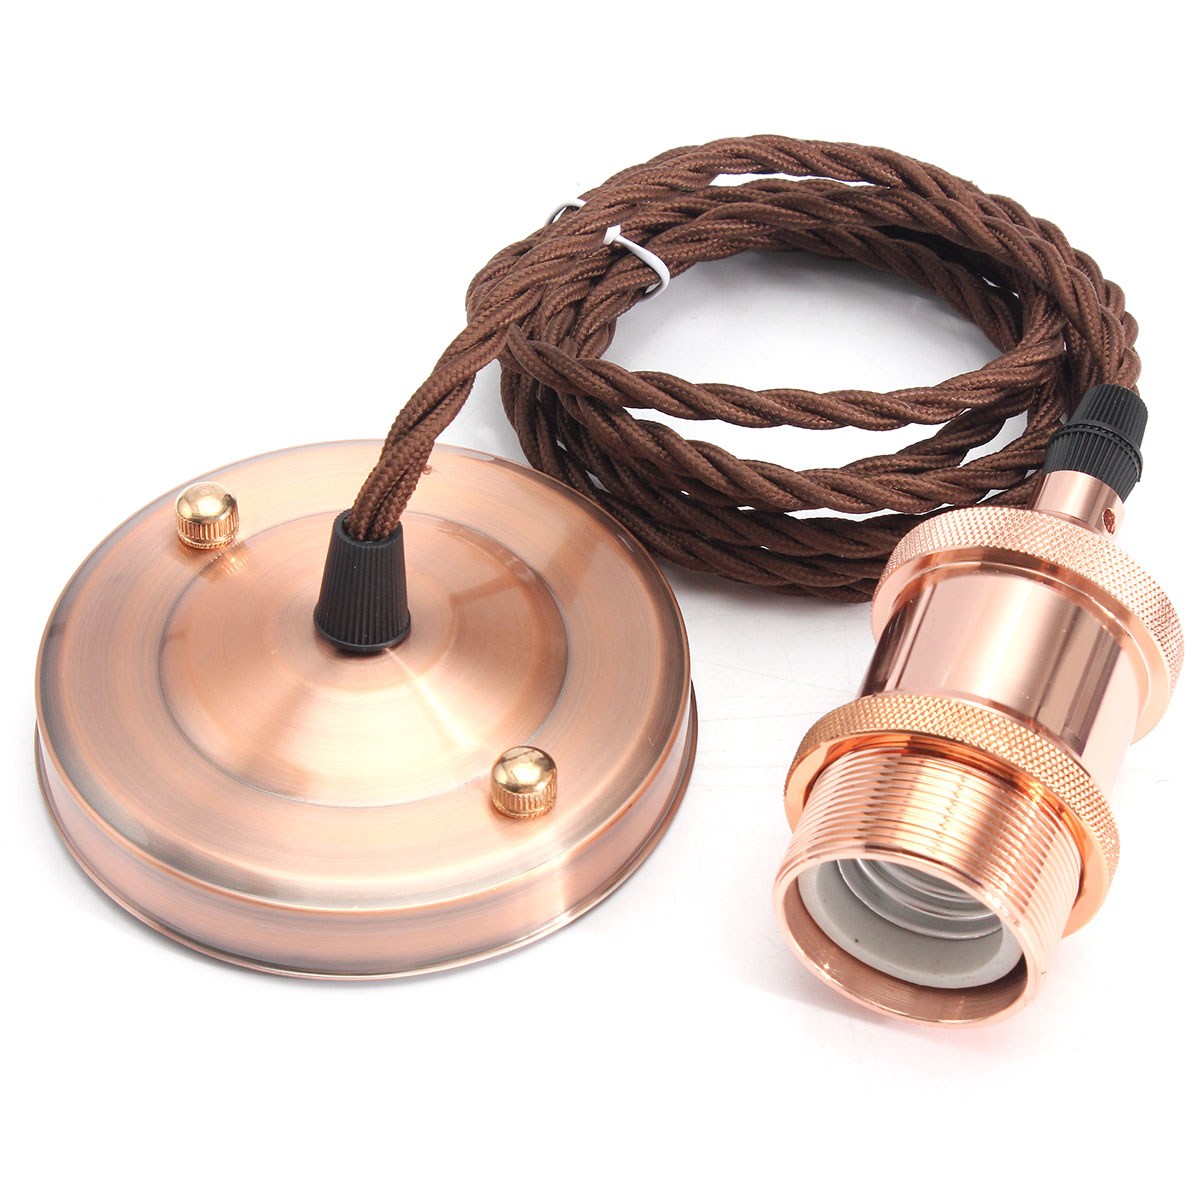 KINGSO-110V-220V-600W-Vintage-Lamp-Holder-Ceiling-Canopy-and-Copper-Socket-with-2M-Wire-1894180-9